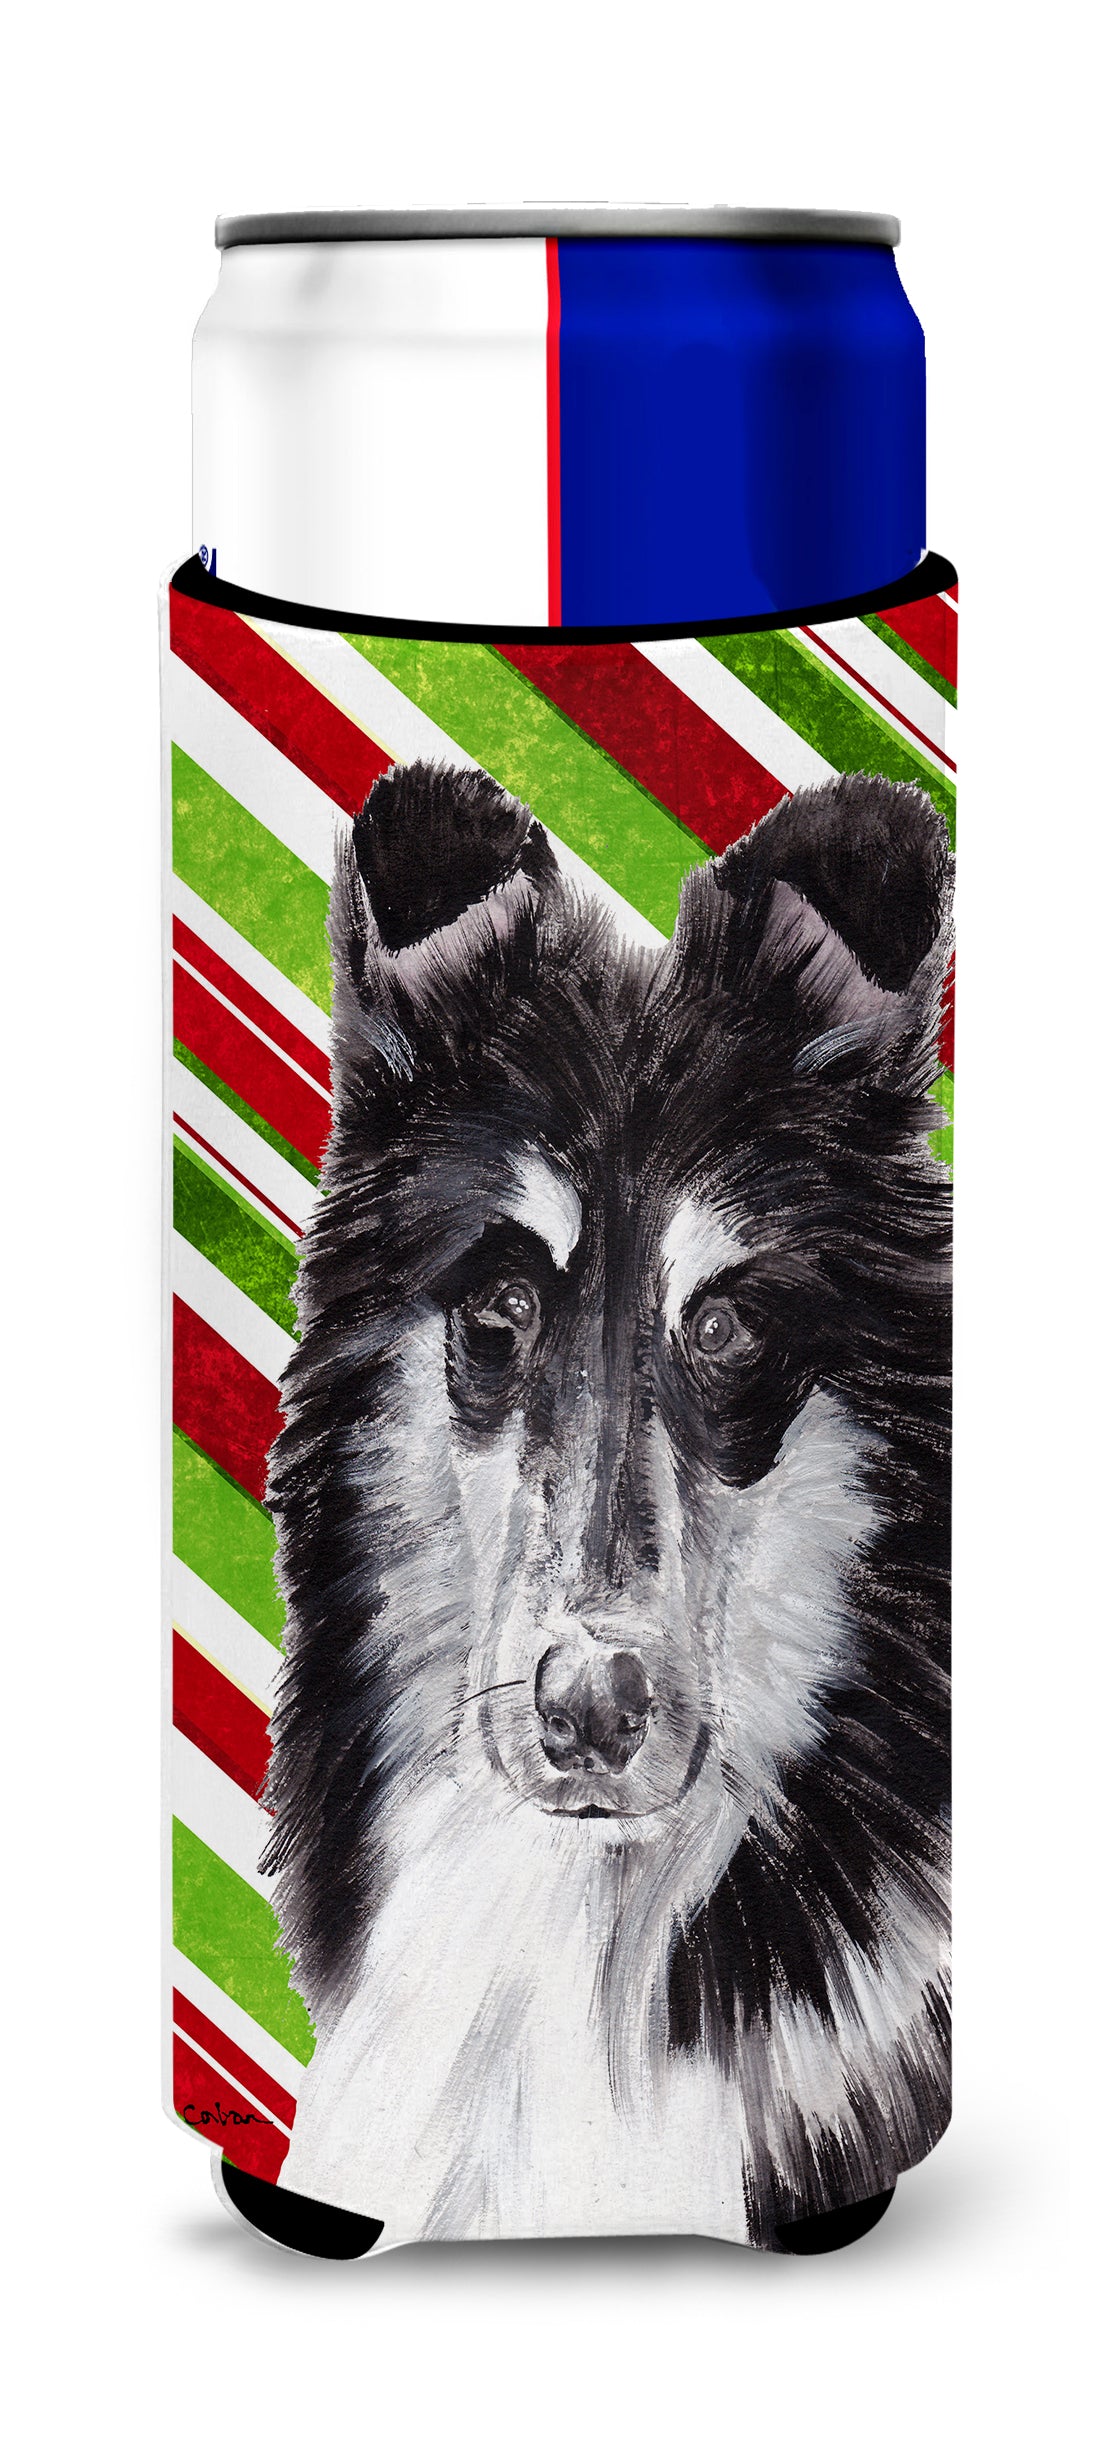 Black and White Collie Candy Cane Christmas Ultra Beverage Insulators for slim cans SC9798MUK.